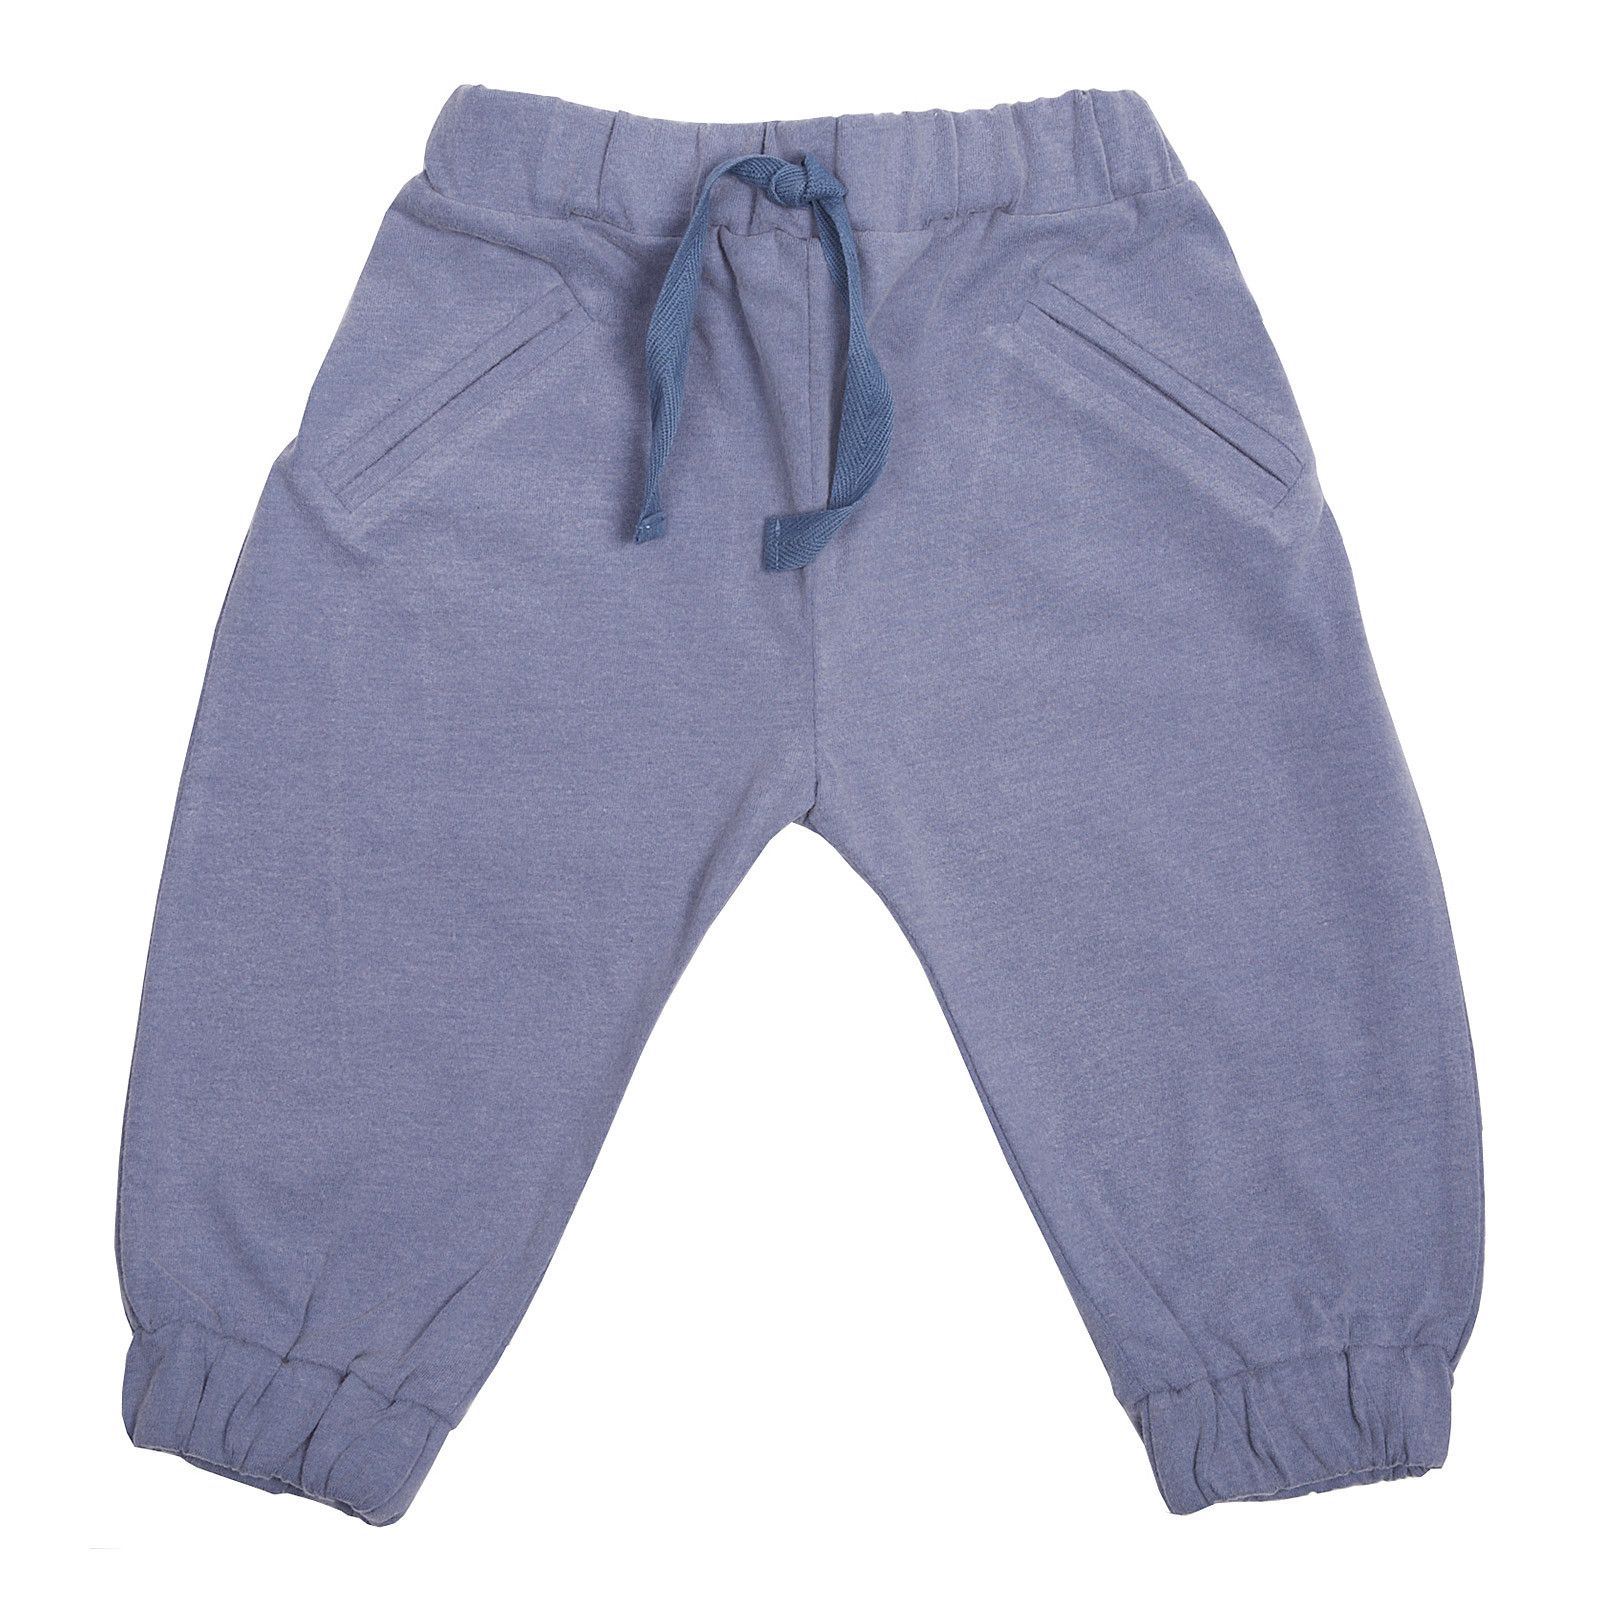 Boys & Girls Blue Cotton Trousers With Elastic Cuffs - CÉMAROSE | Children's Fashion Store